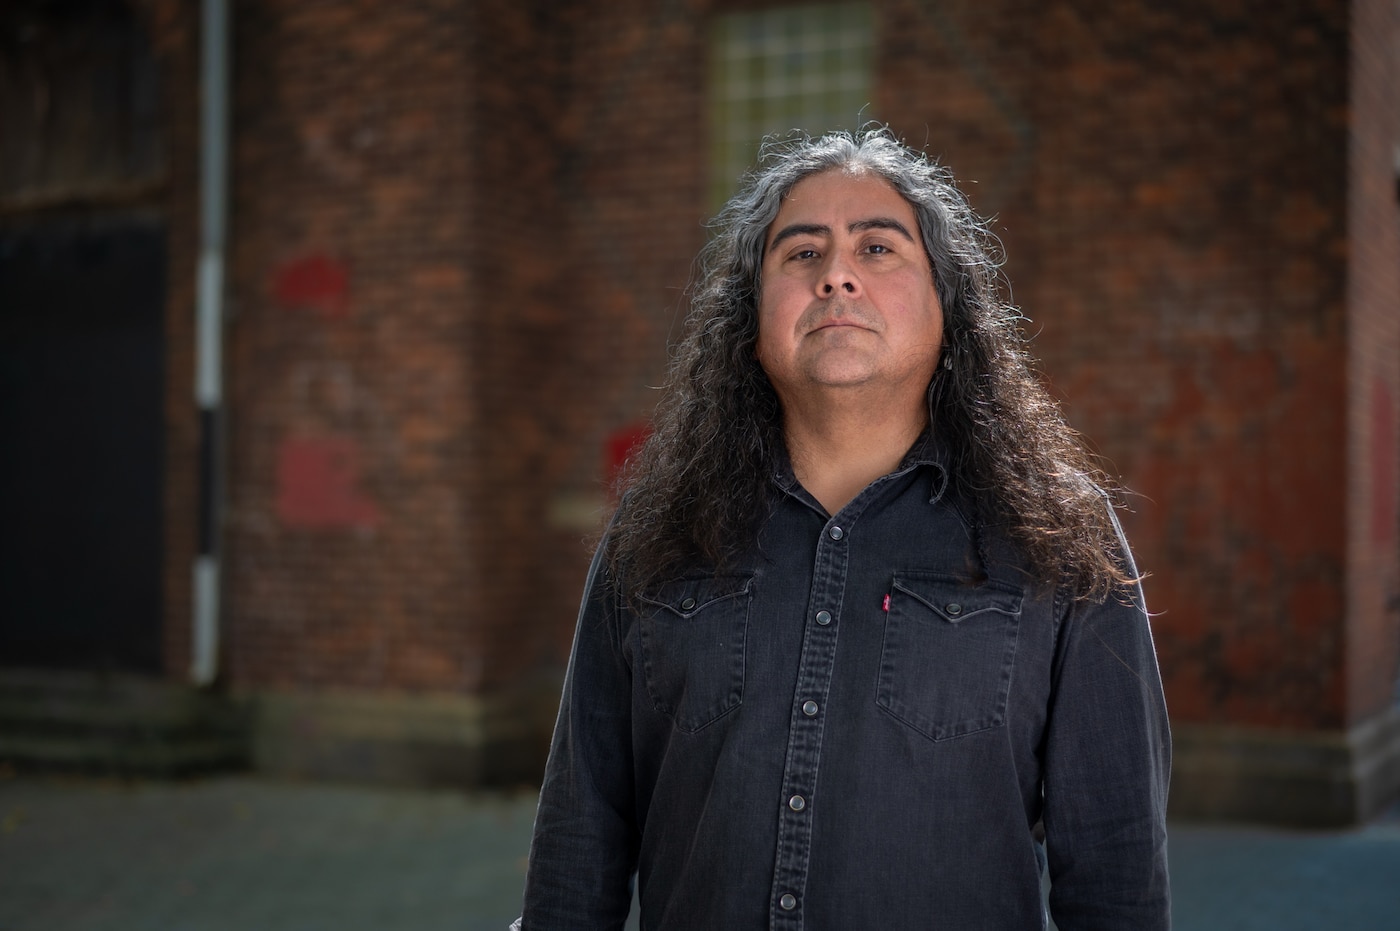 An image of artist and composer Raven Chacon standing in front of a building looking straight at the camera.